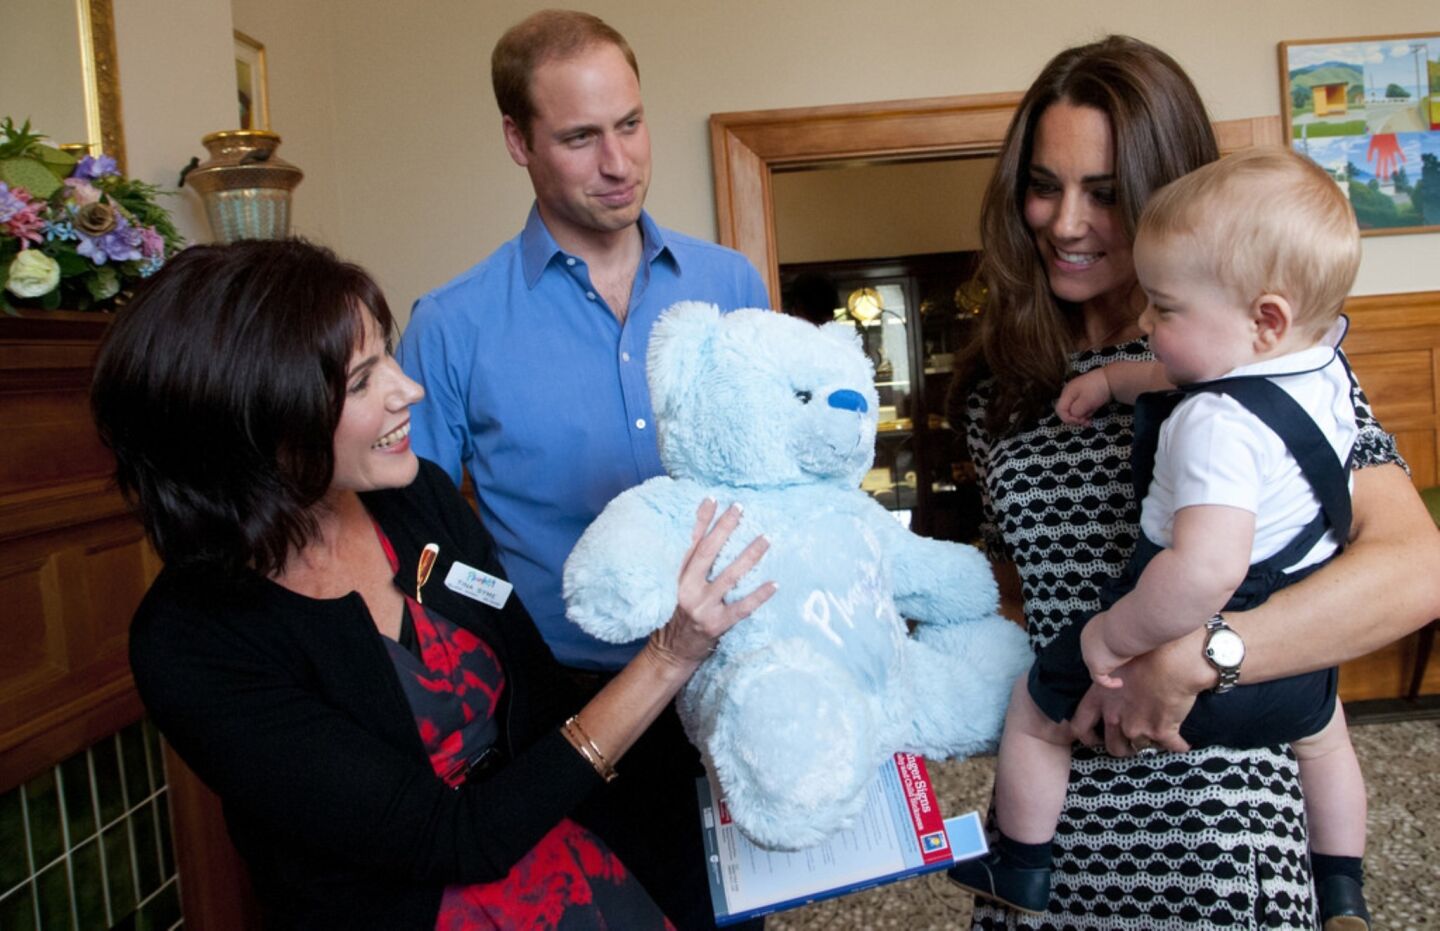 Prince William, Catherine and Prince George visit a Plunket parents' group at Government House on April 9 in Wellington.